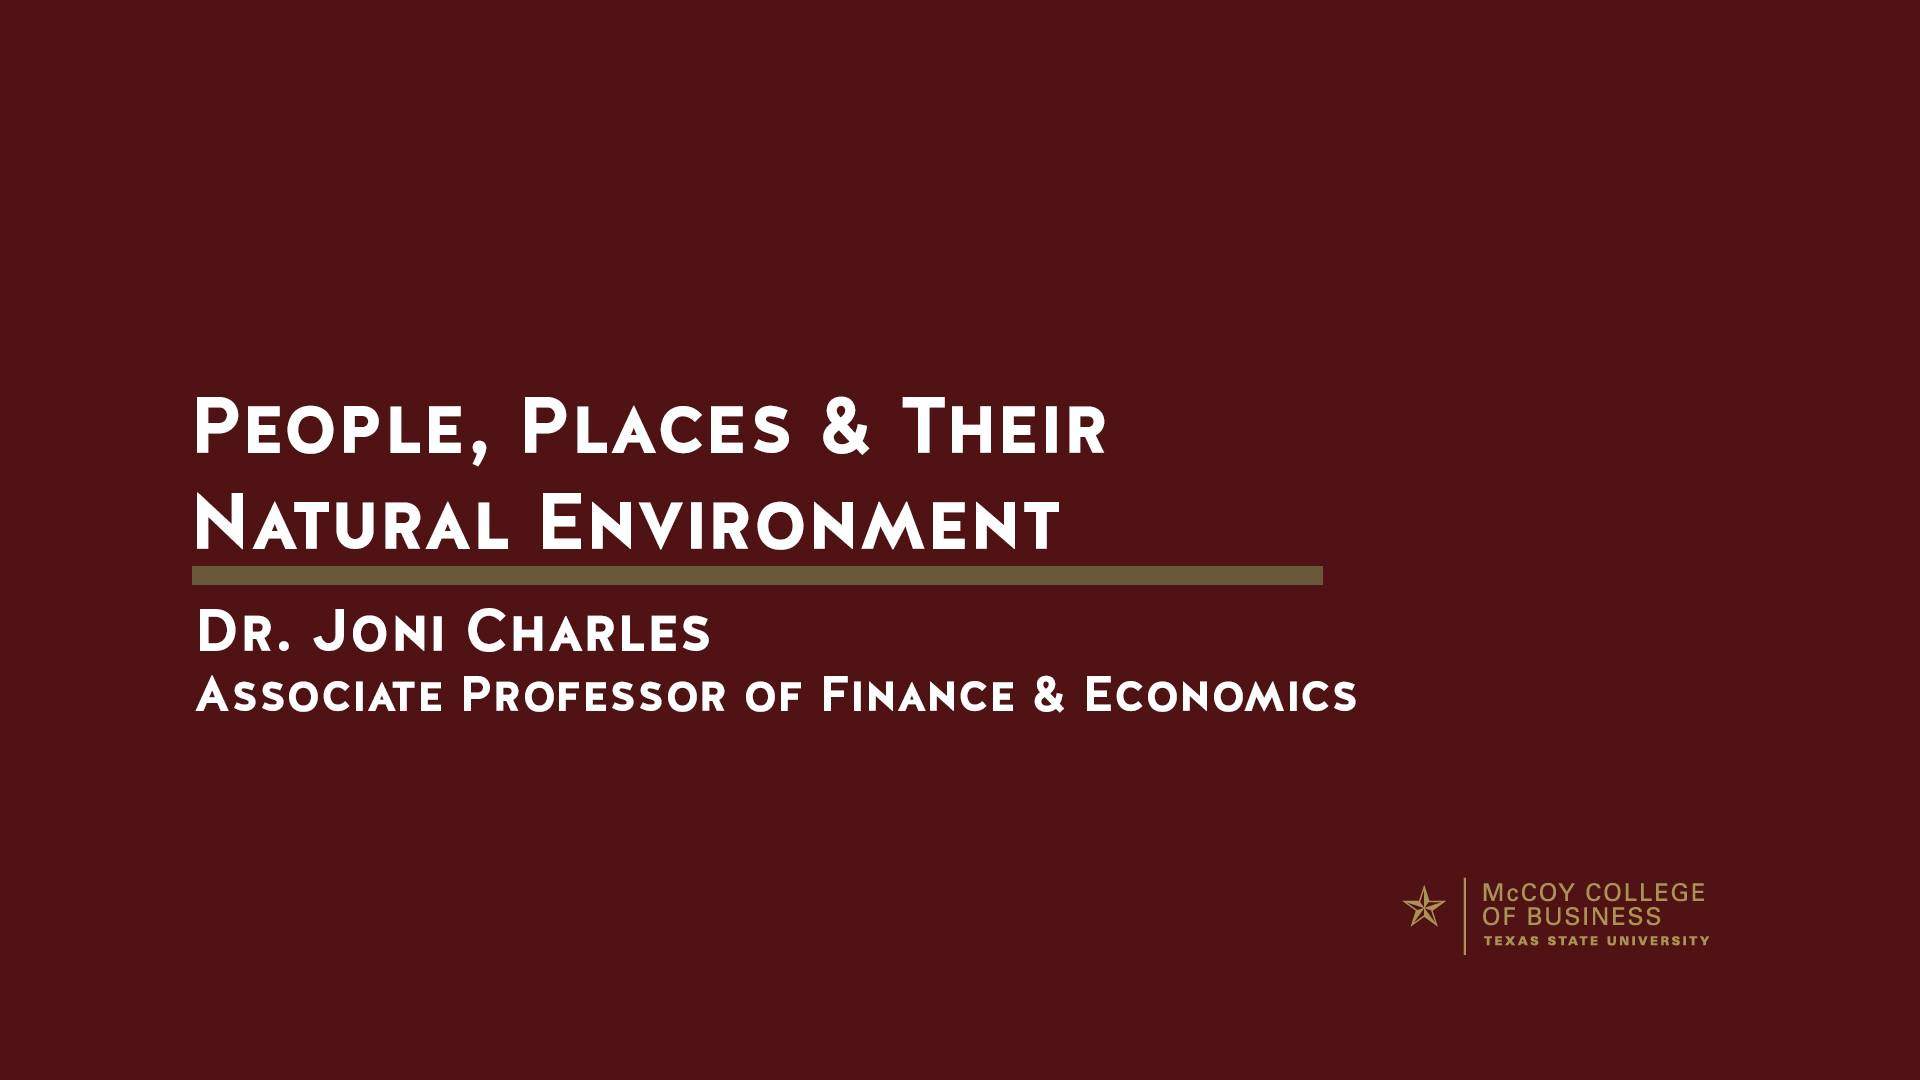 Dr. Joni Charles discusses her research on the environment and finance